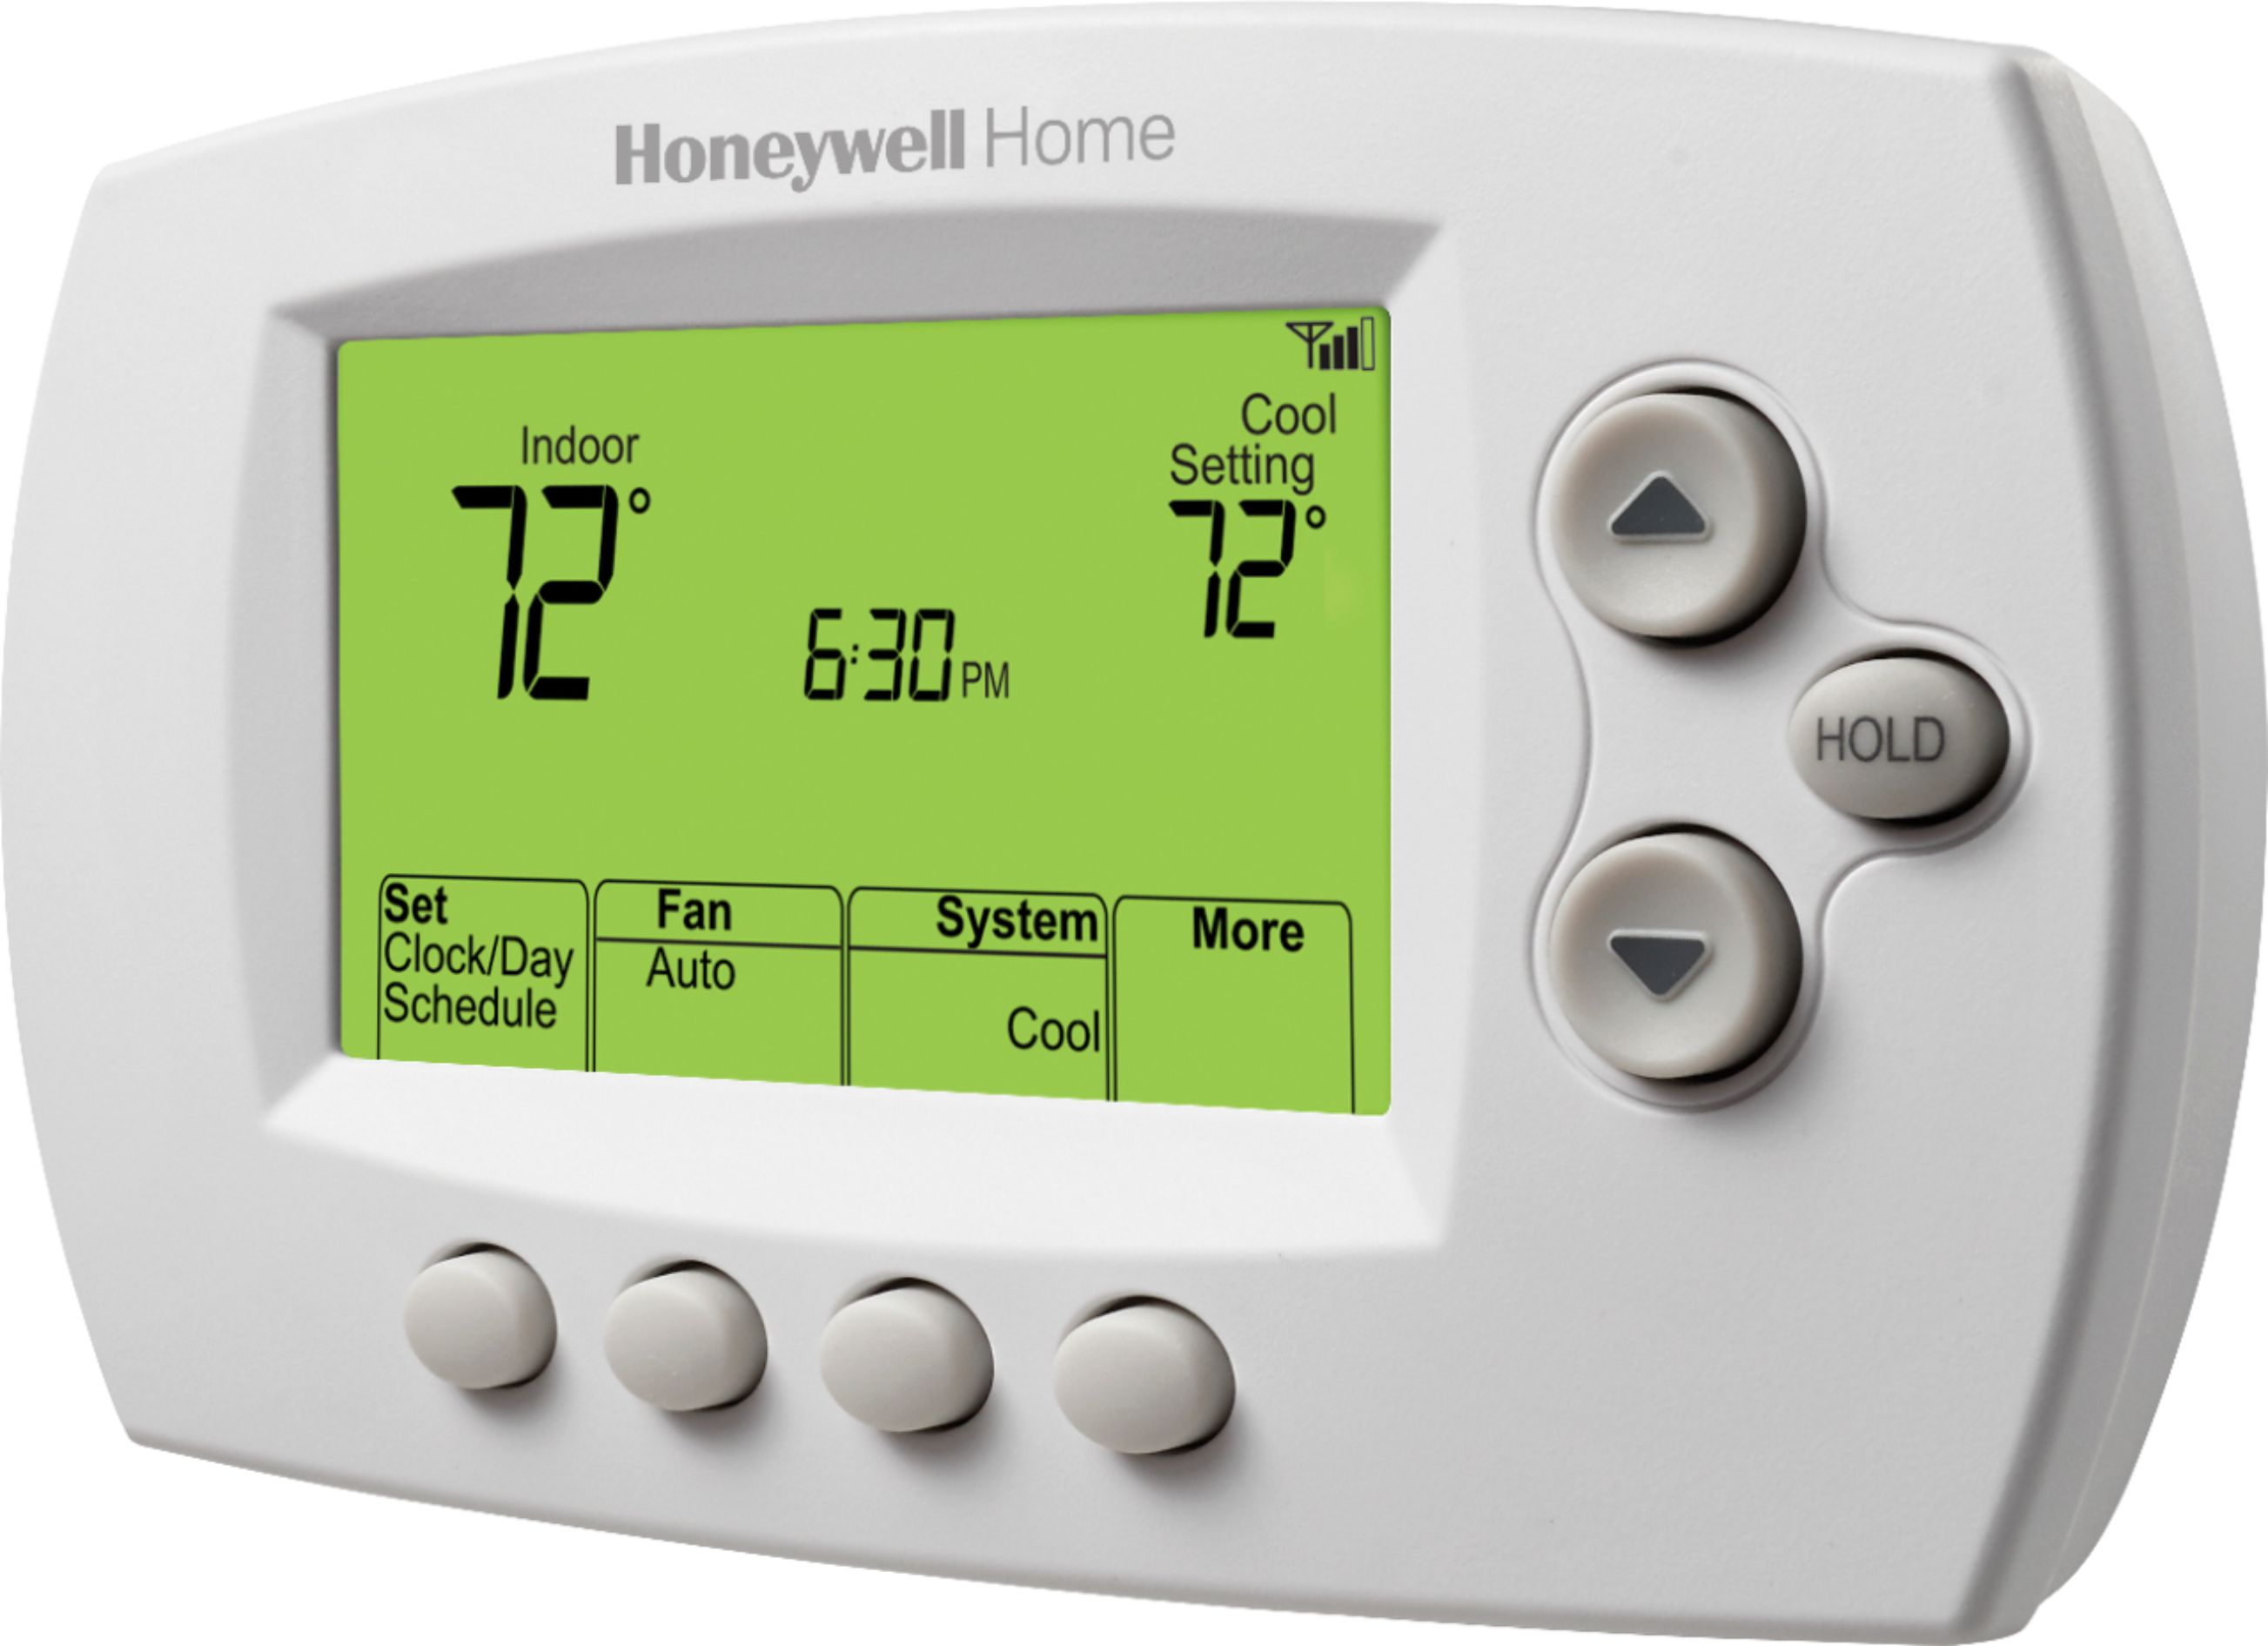 customer-reviews-honeywell-home-7-day-programmable-thermostat-with-wi